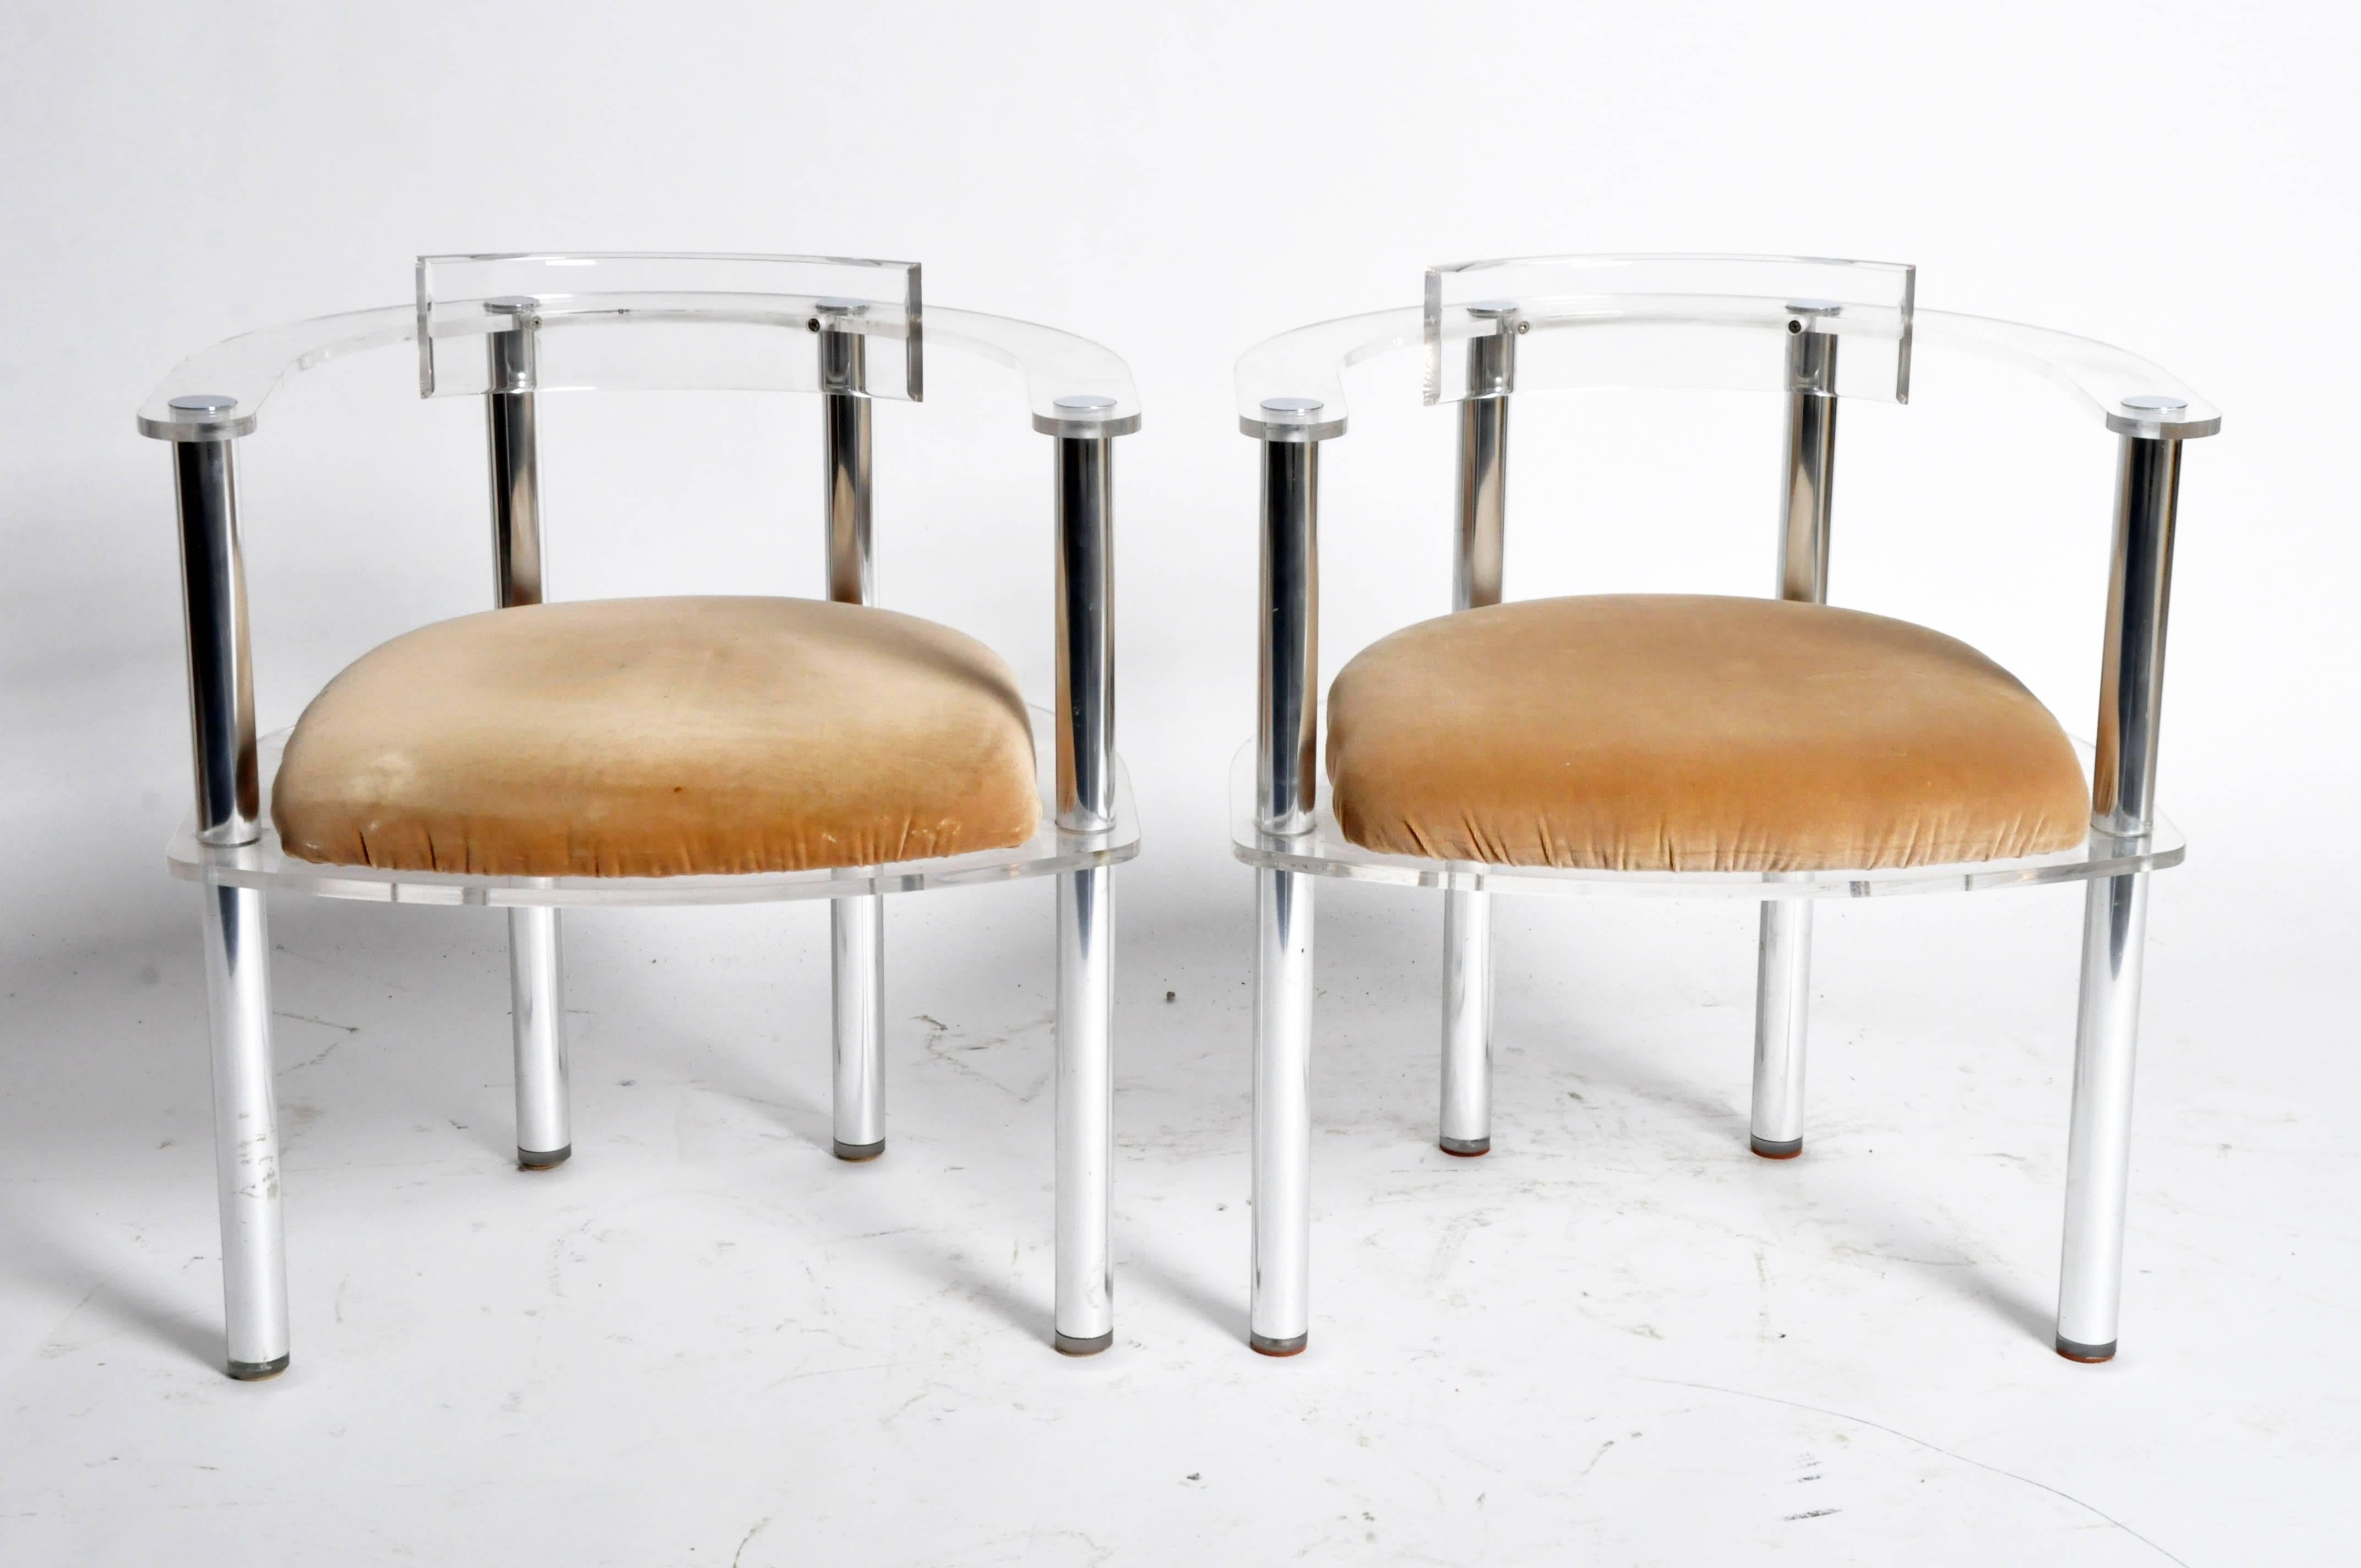 These unique Mid-Century chairs are from Paris, France and are made from plexiglass and metal.